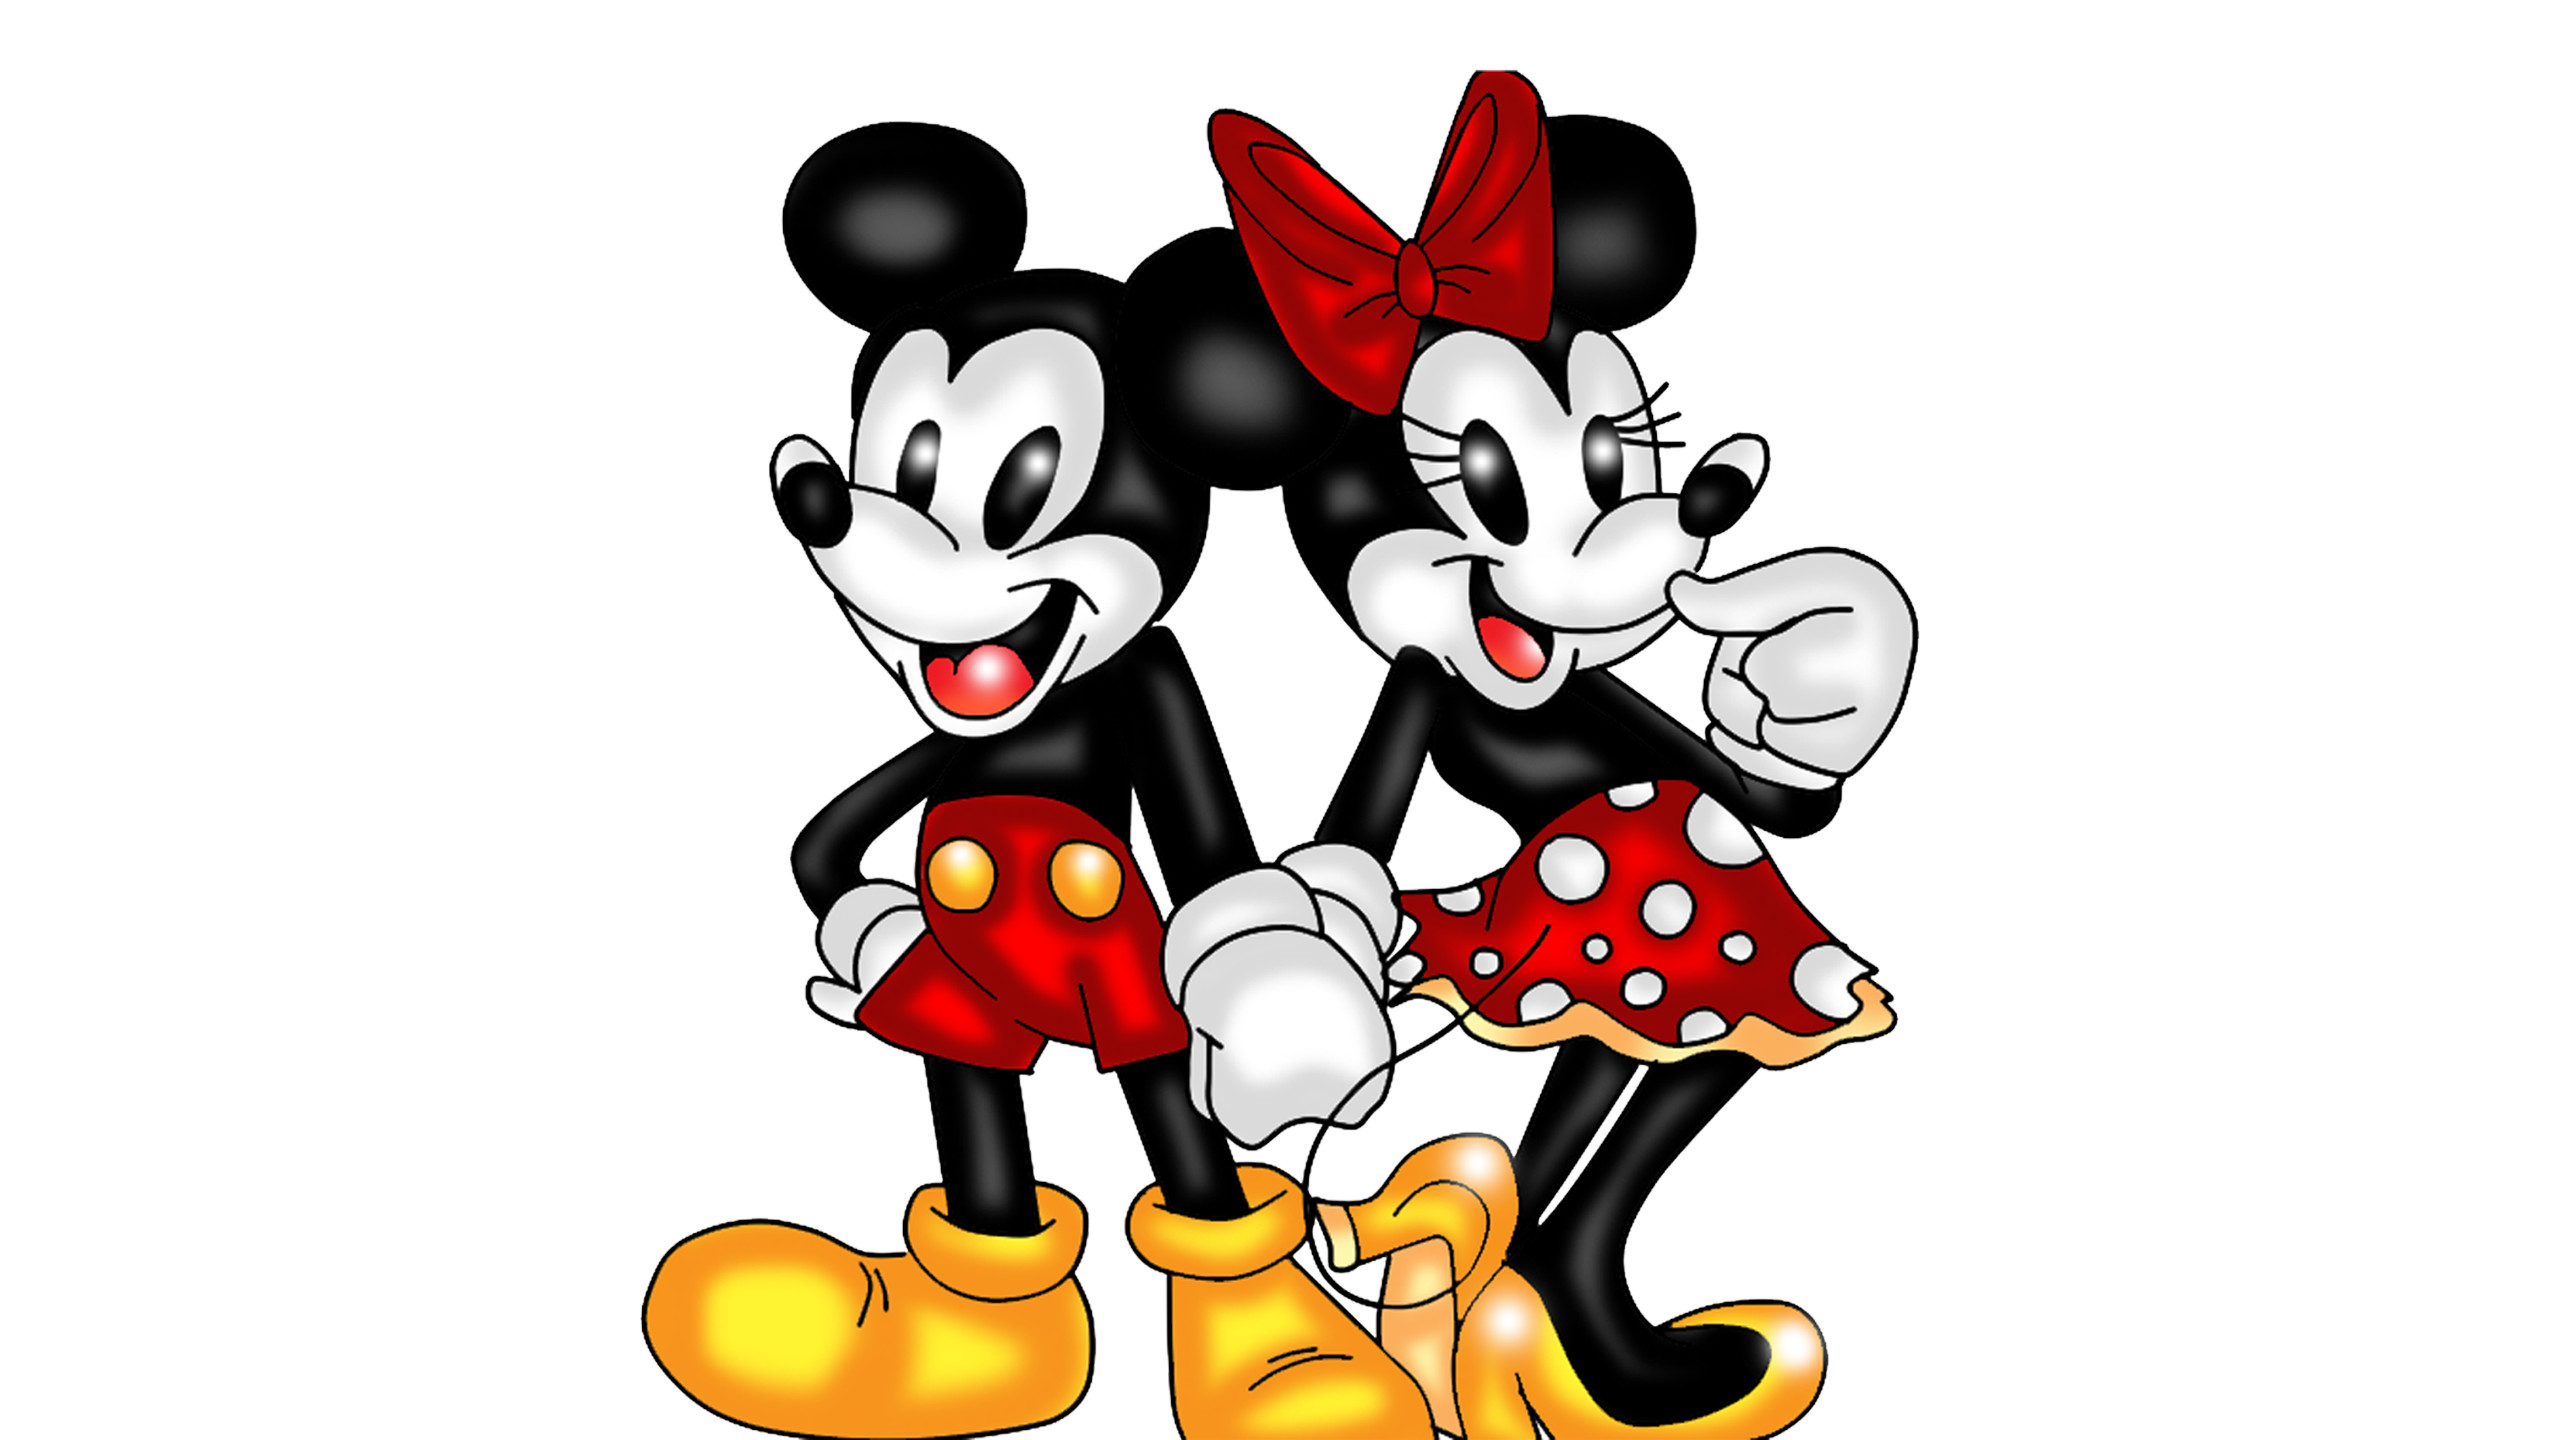 Mickey And Minnie Mouse Love Couple Wallpaper Hd Mickey And Minnie